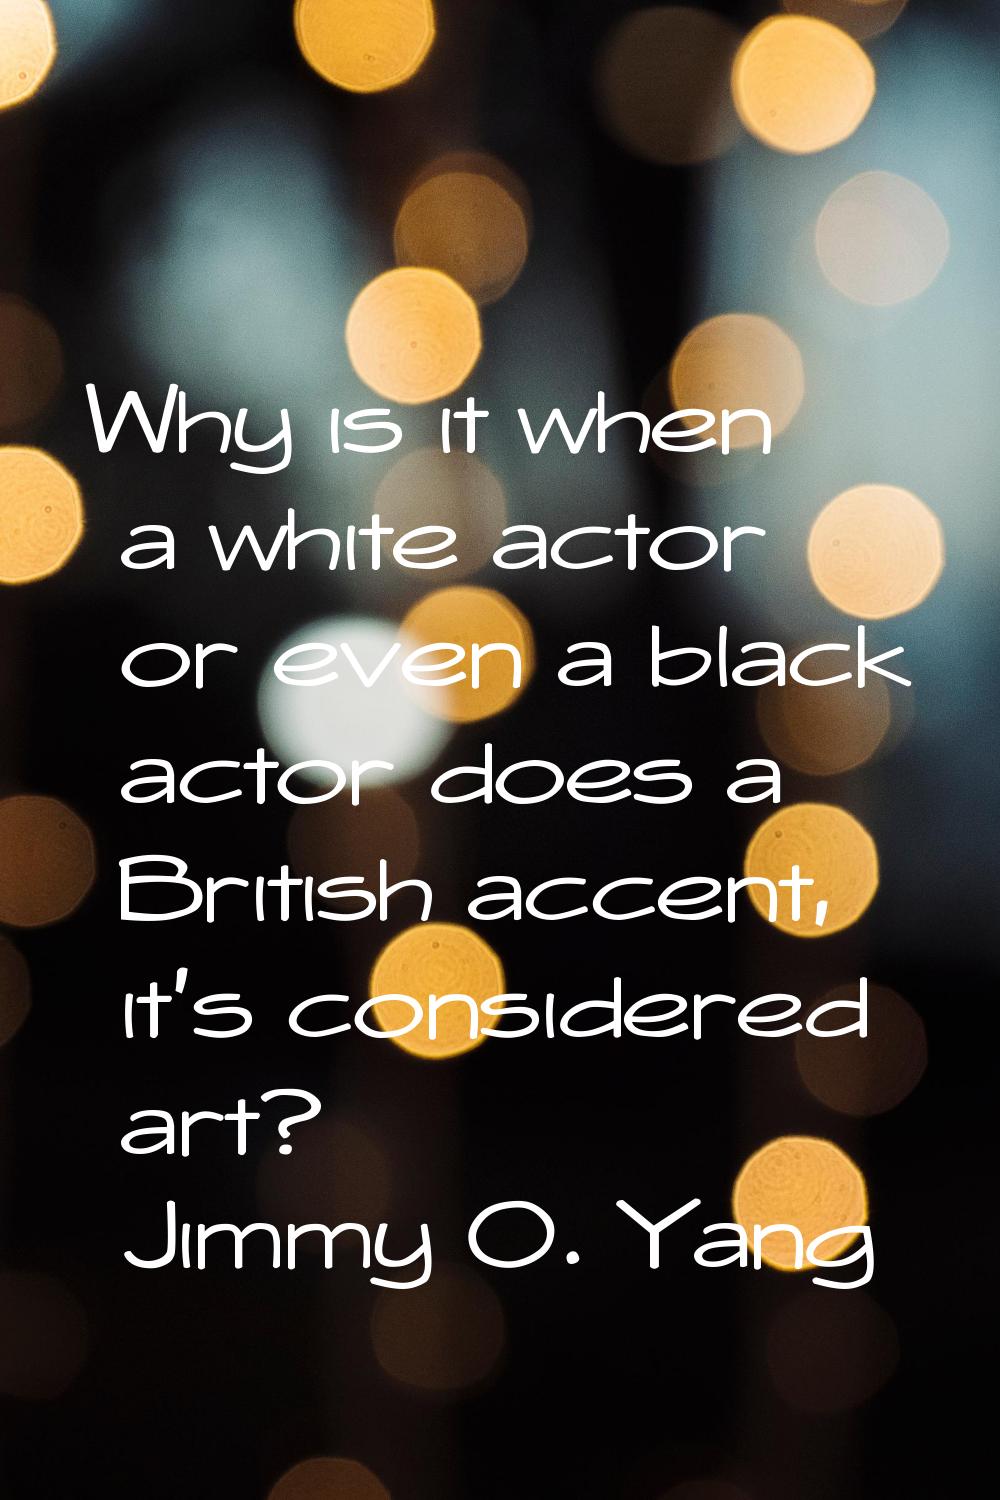 Why is it when a white actor or even a black actor does a British accent, it's considered art?